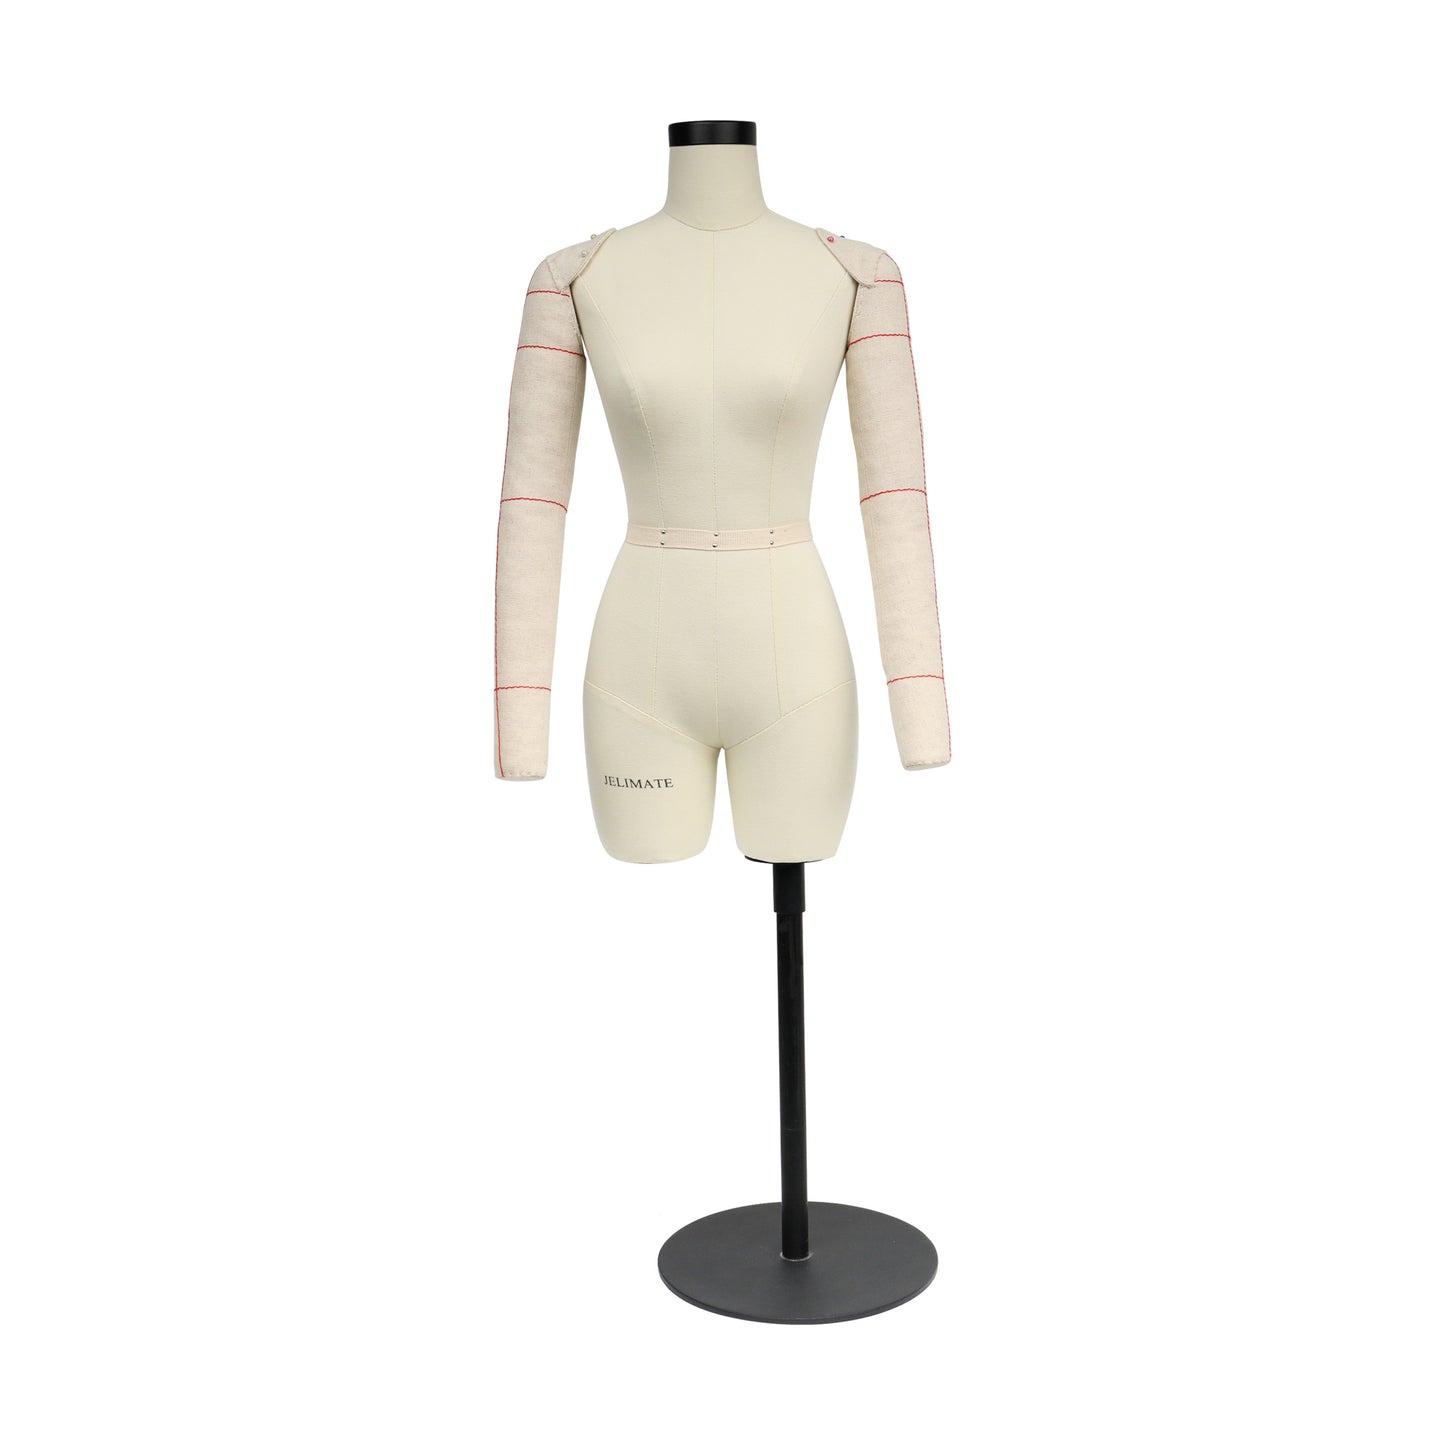 JMSIZE4 Half Scale Female Dress Form For Pattern Making,1/2 Scale Miniature Sewing Mannequin for Women,Mini Tailor Mannequin for Fashion Designer Fashion School Draping Mannequin